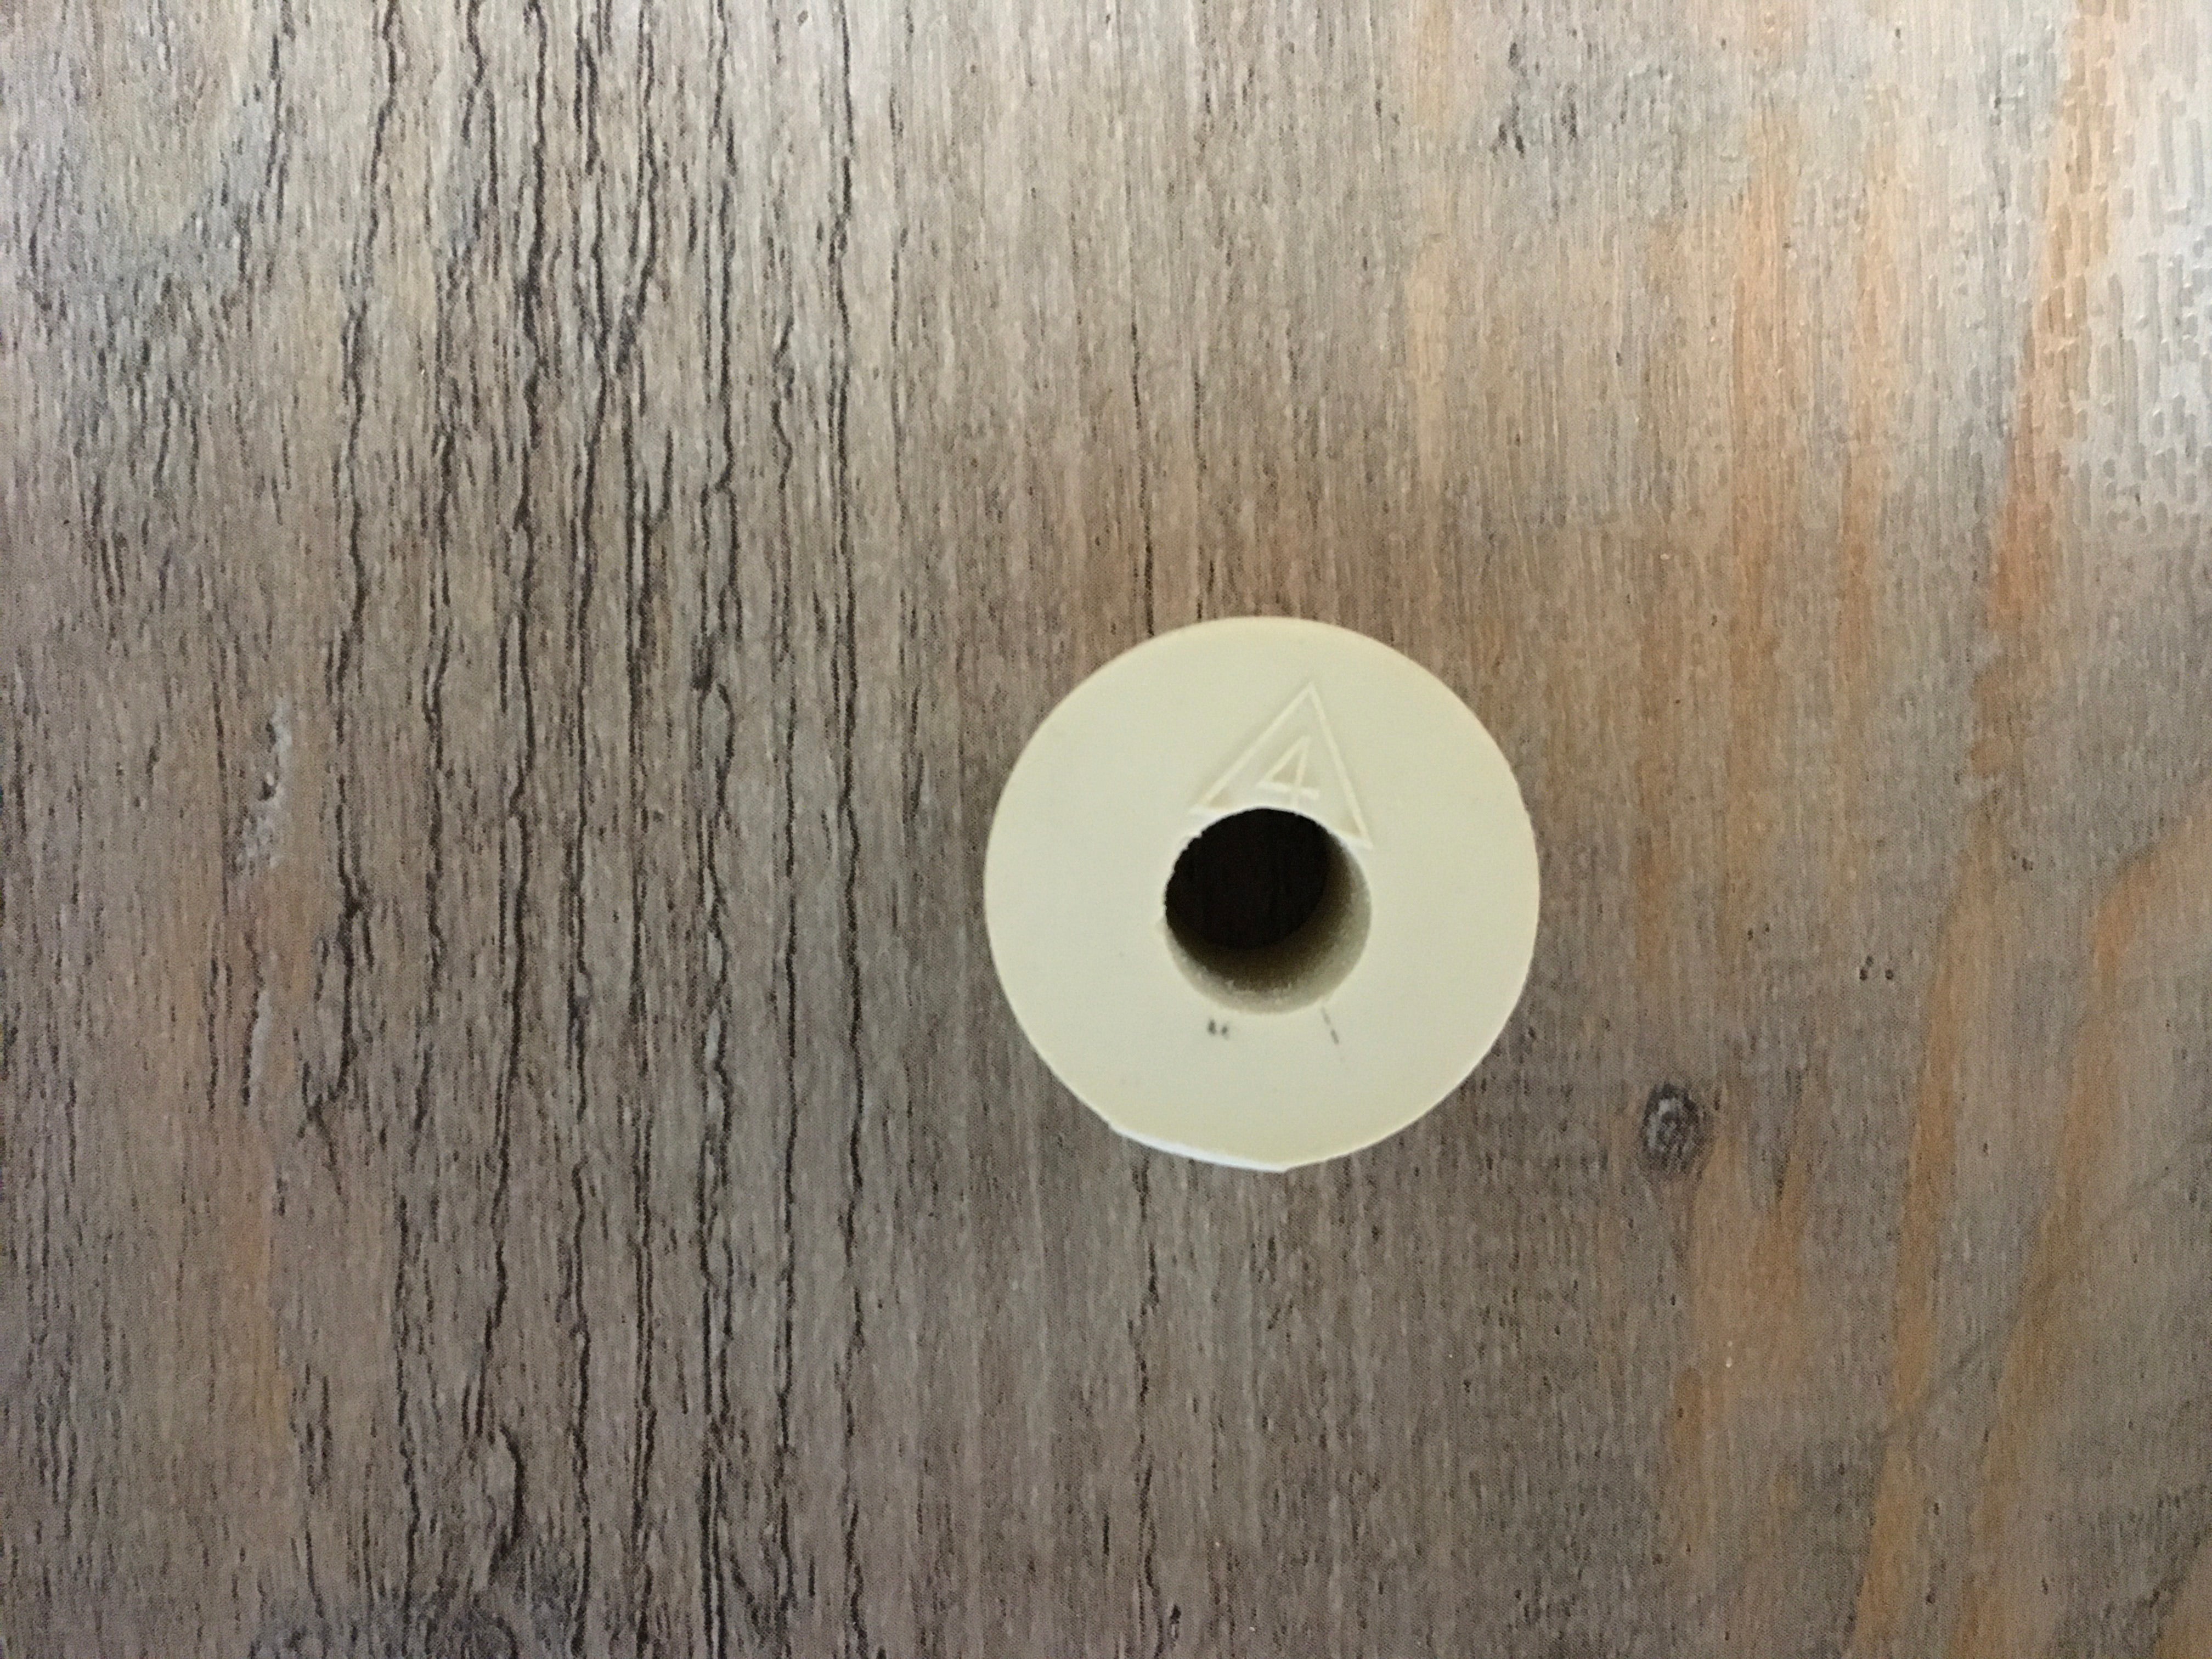 Rubber Bung  #4 with hole